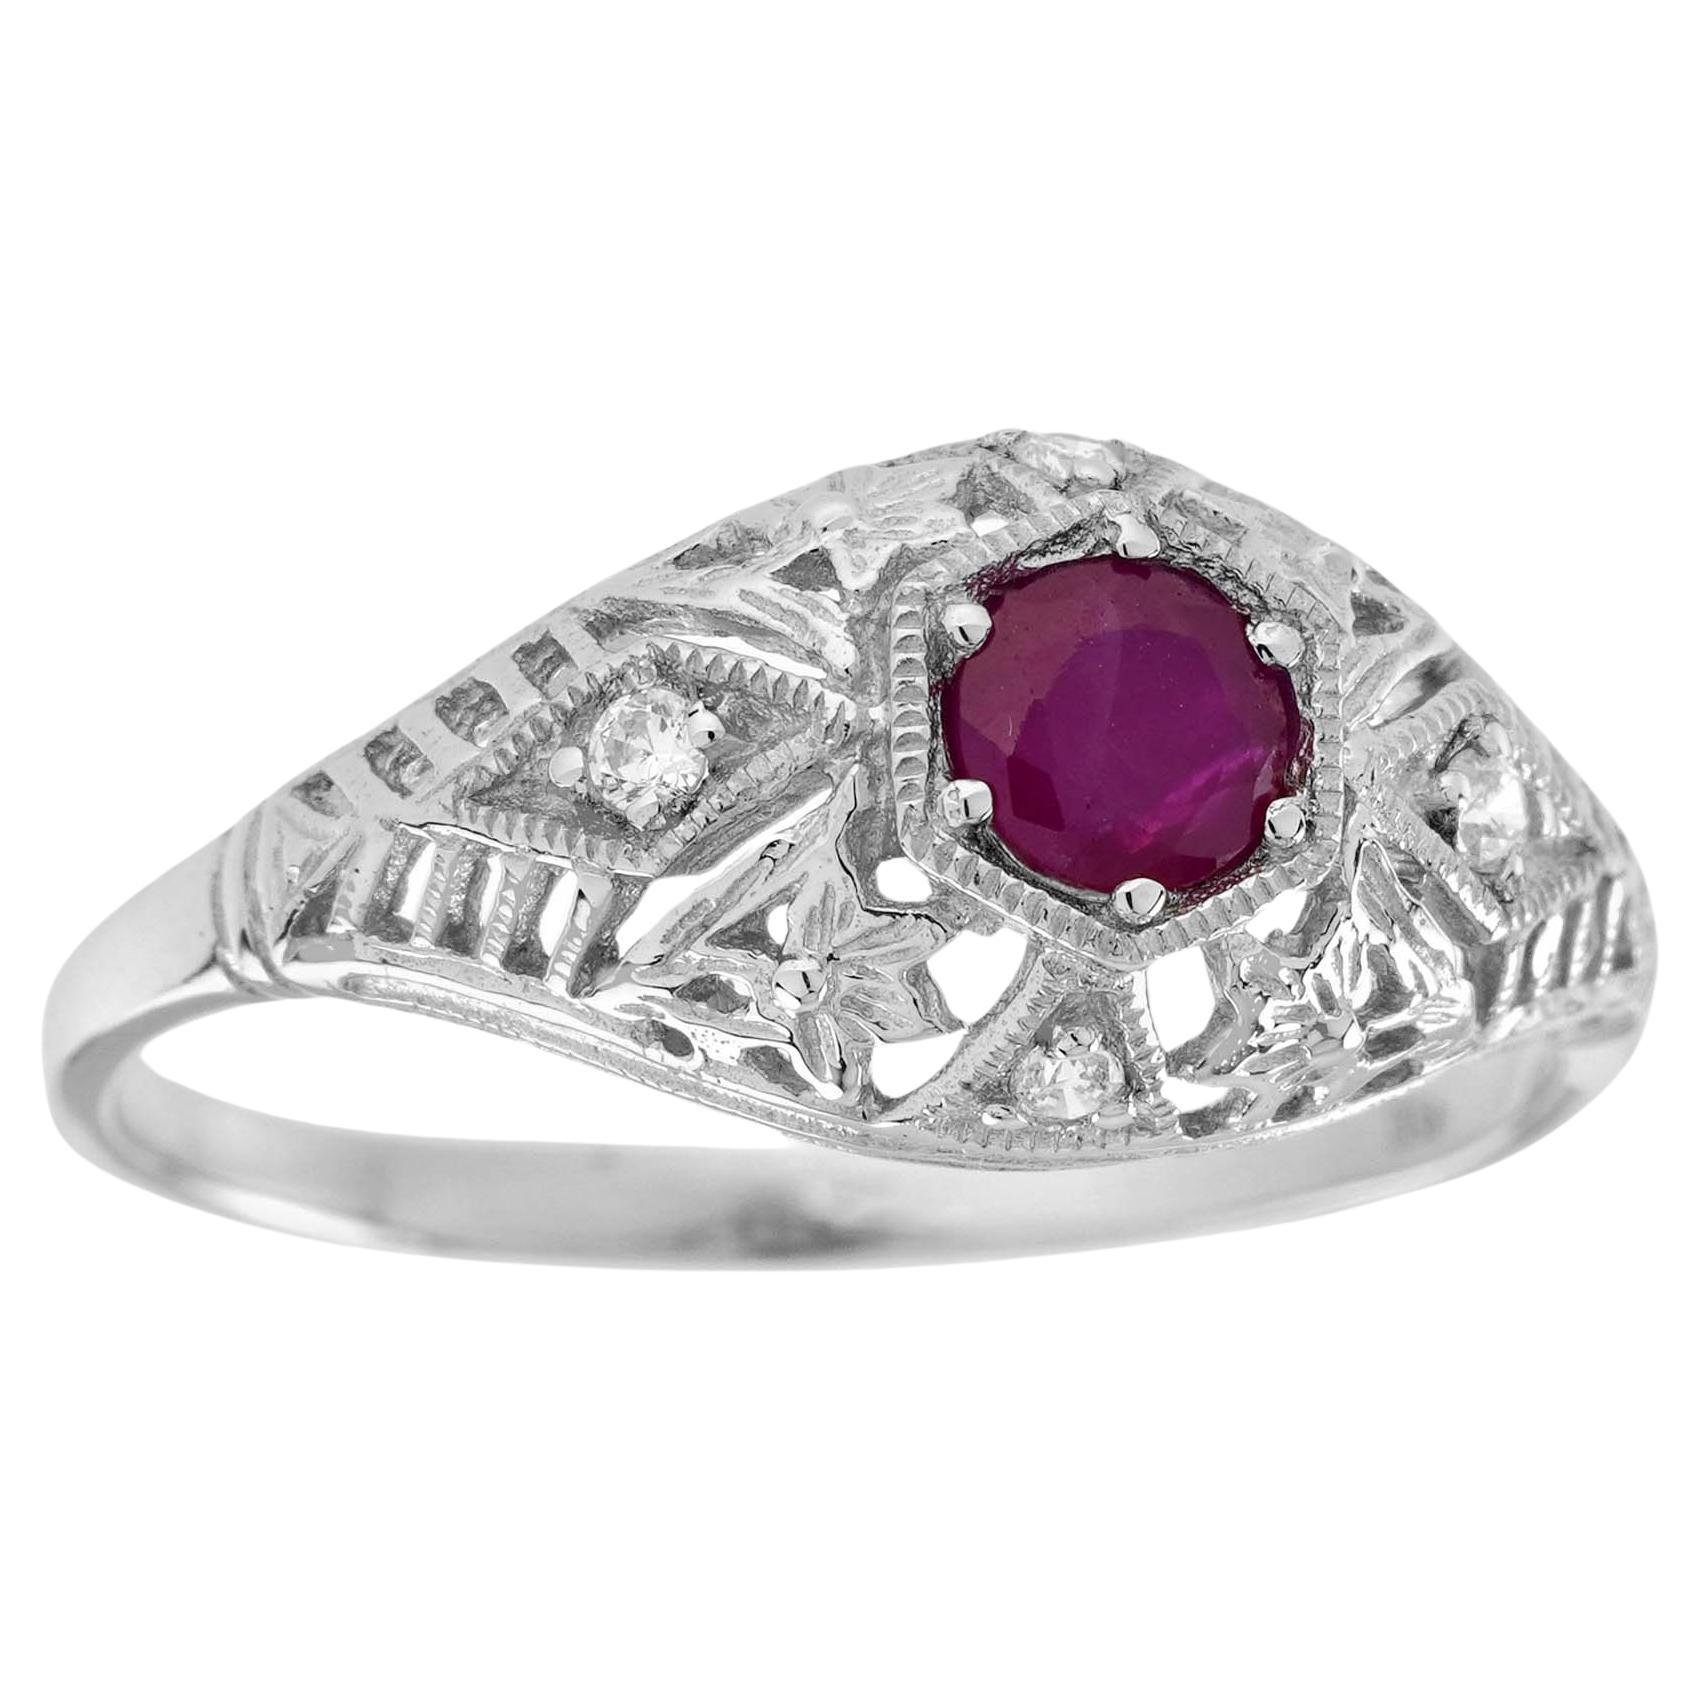 For Sale:  Natural Ruby and Diamond Vintage Style Filigree  Ring in Solid 9K White Gold